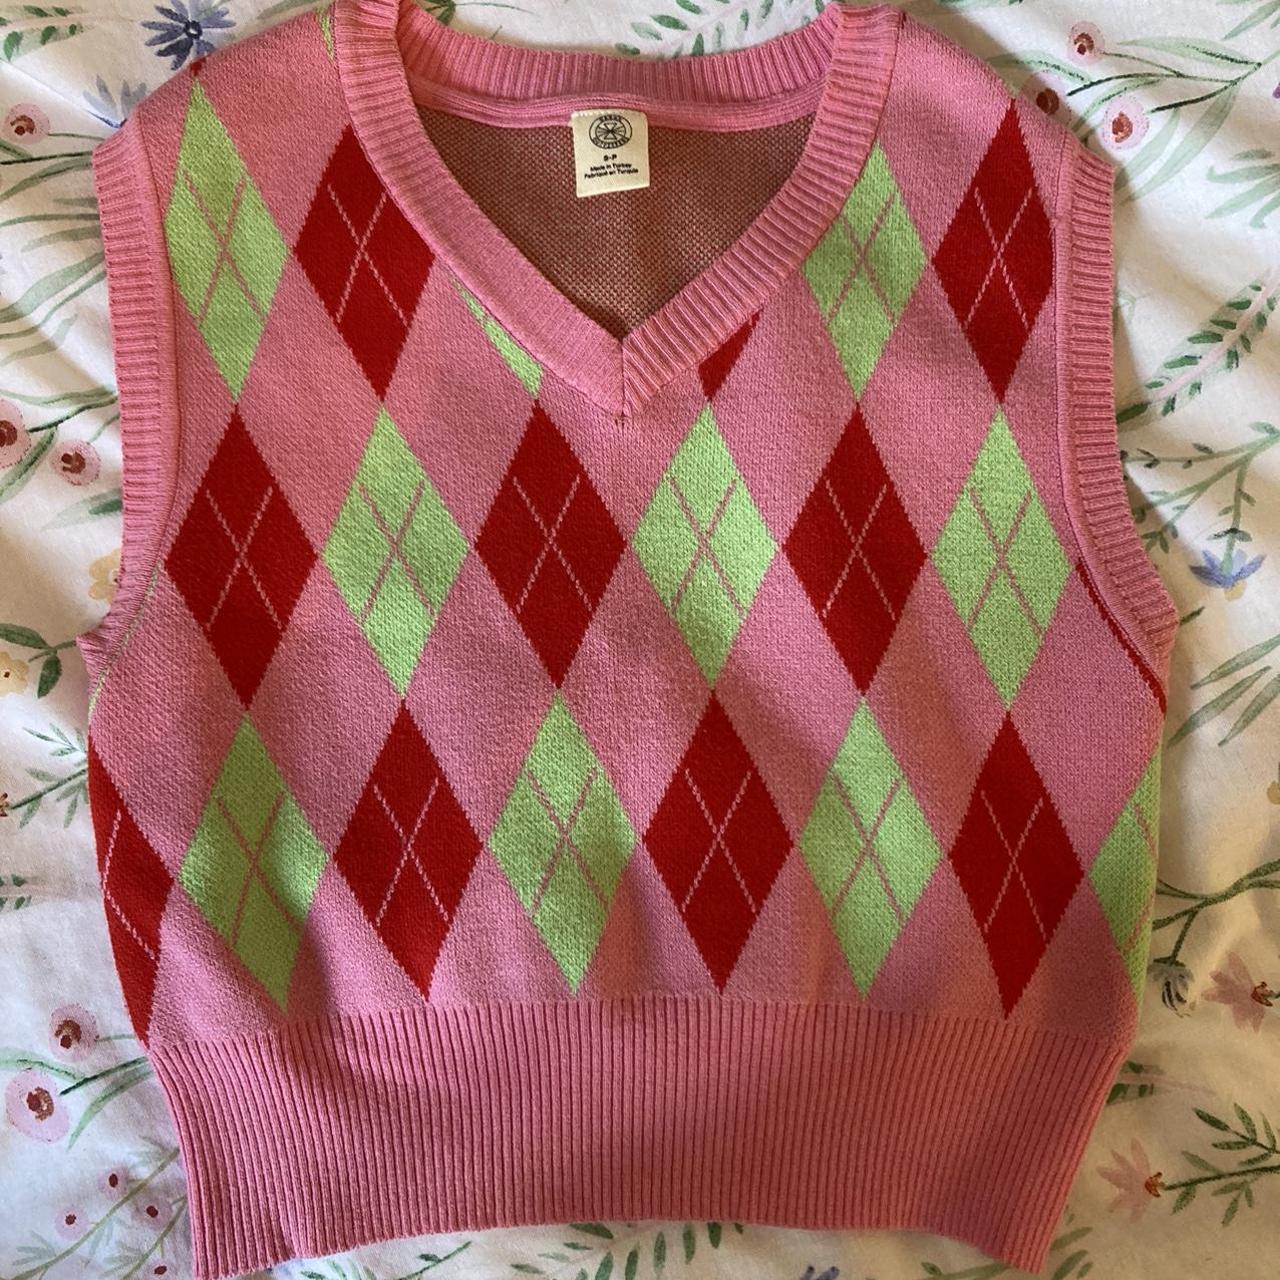 Urban Outfitters Women's Pink and Green Vest | Depop